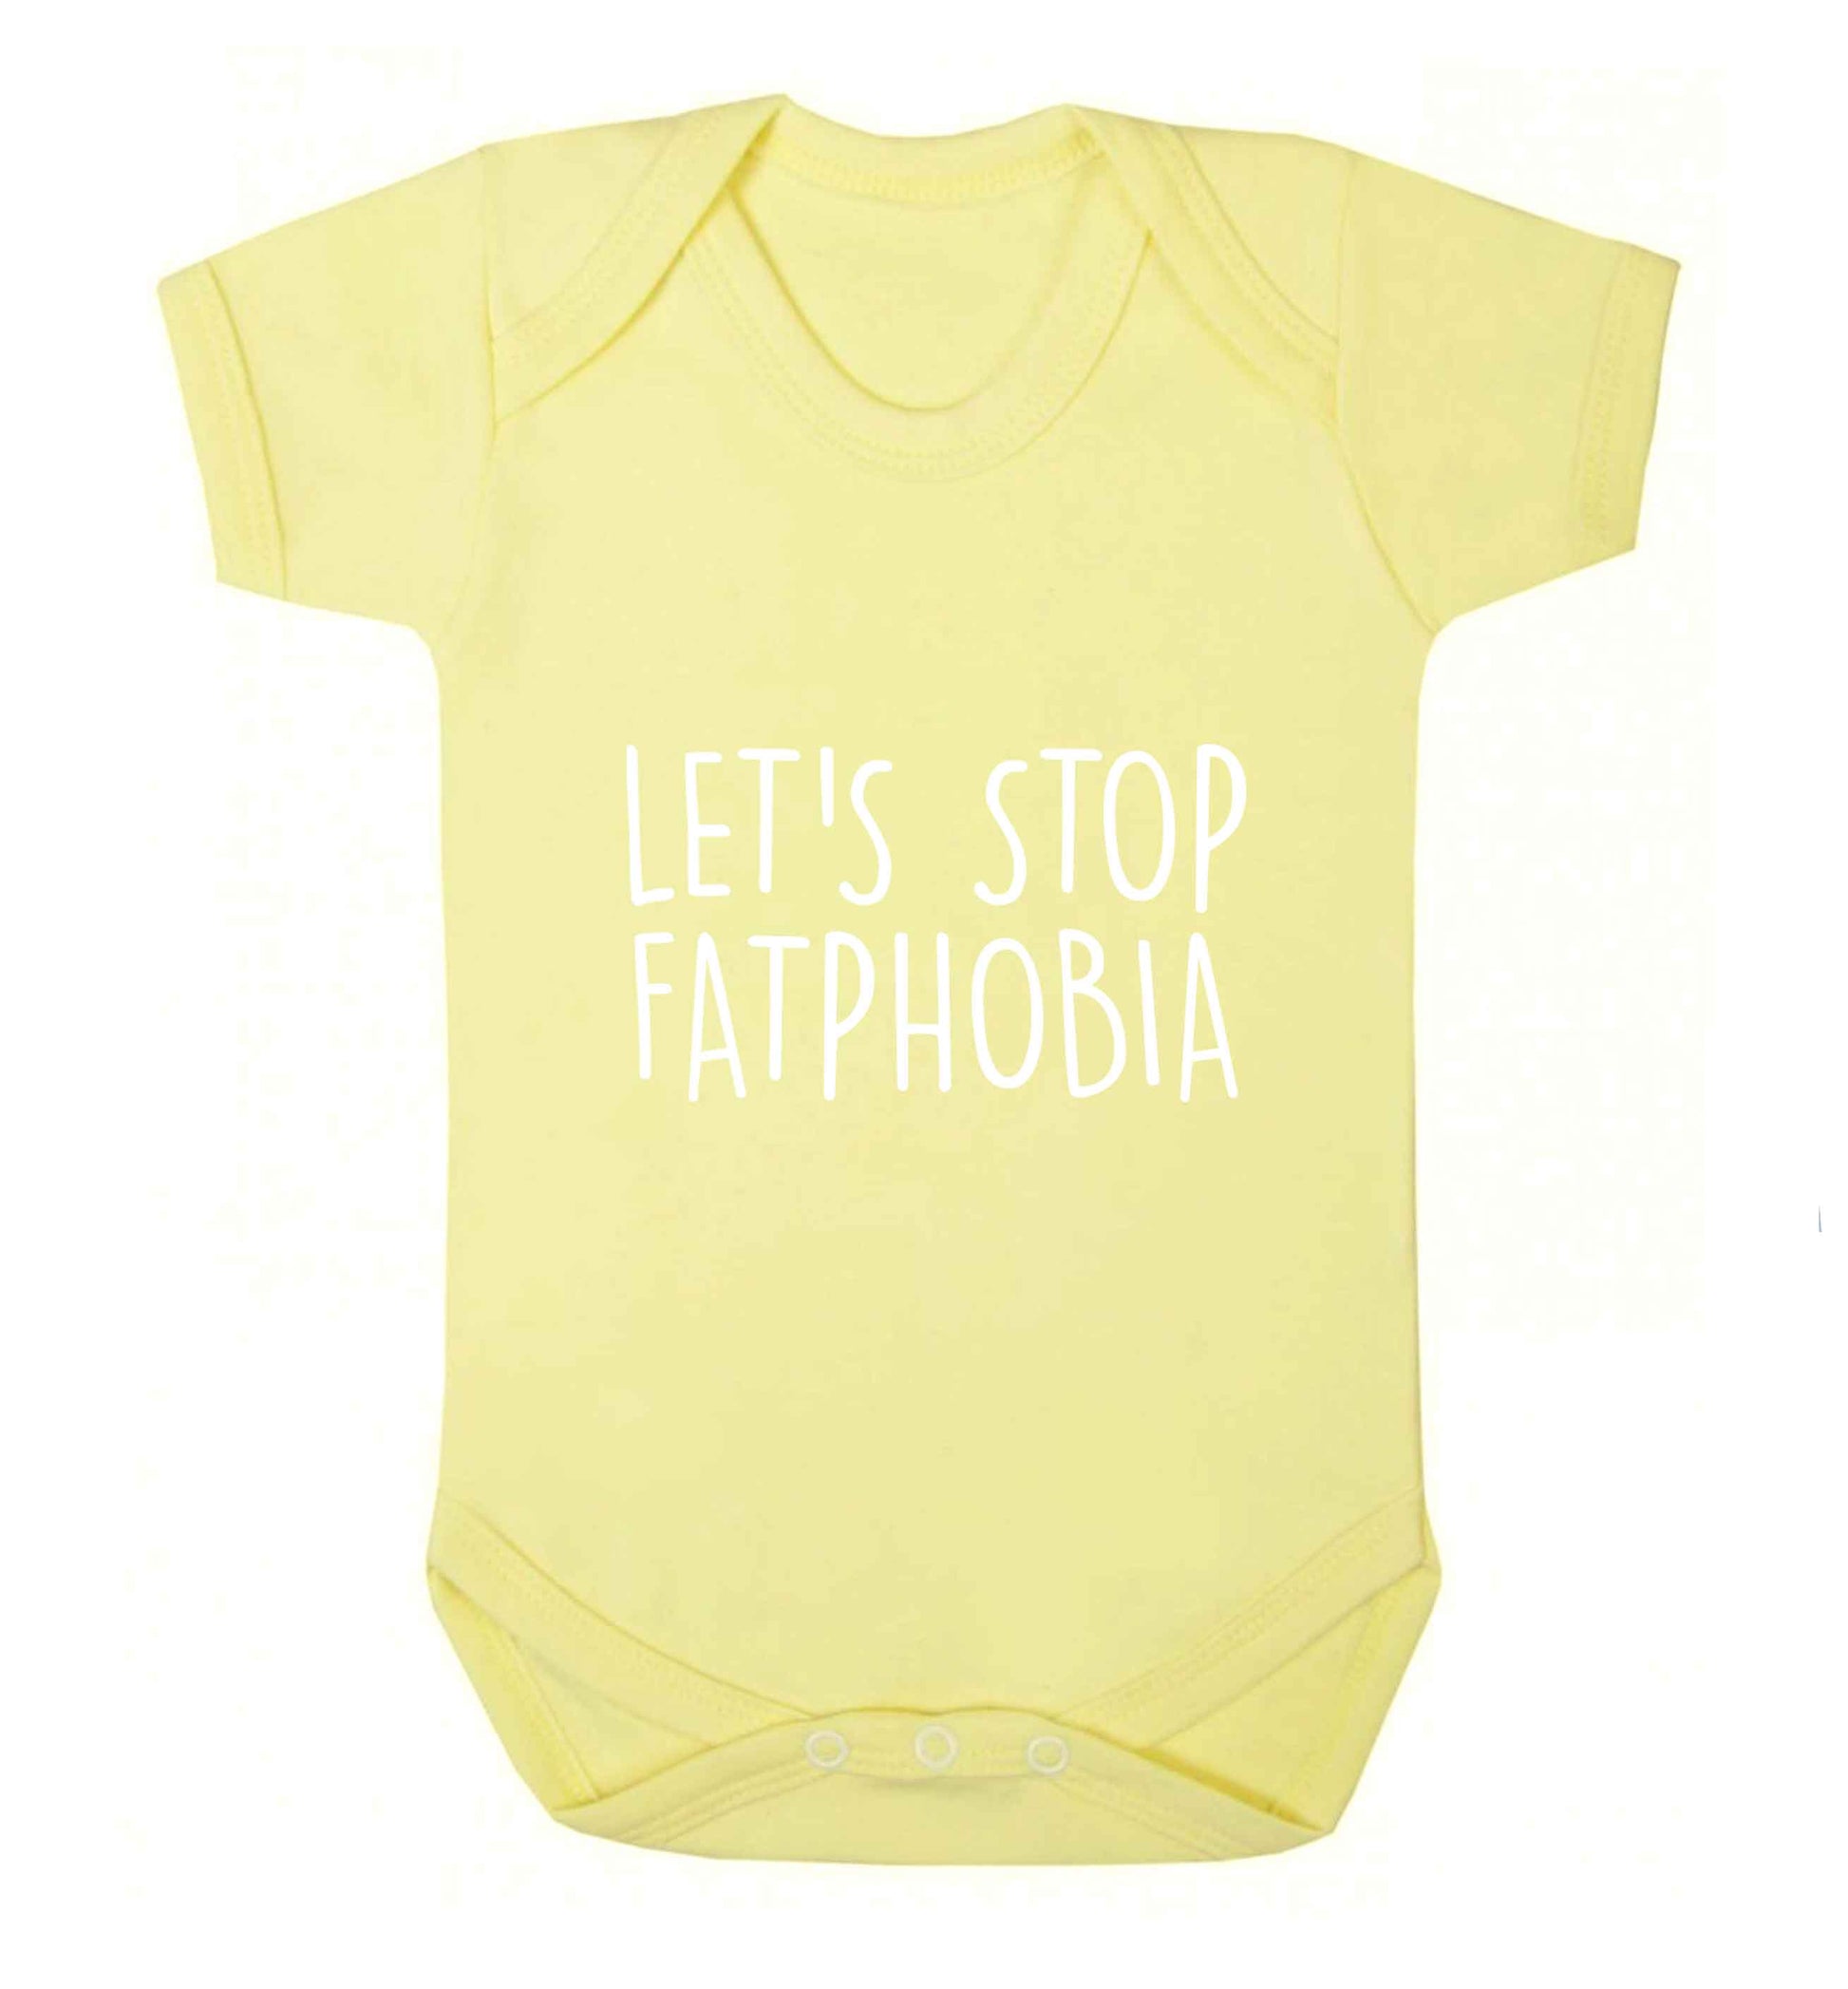 Let's stop fatphobia baby vest pale yellow 18-24 months